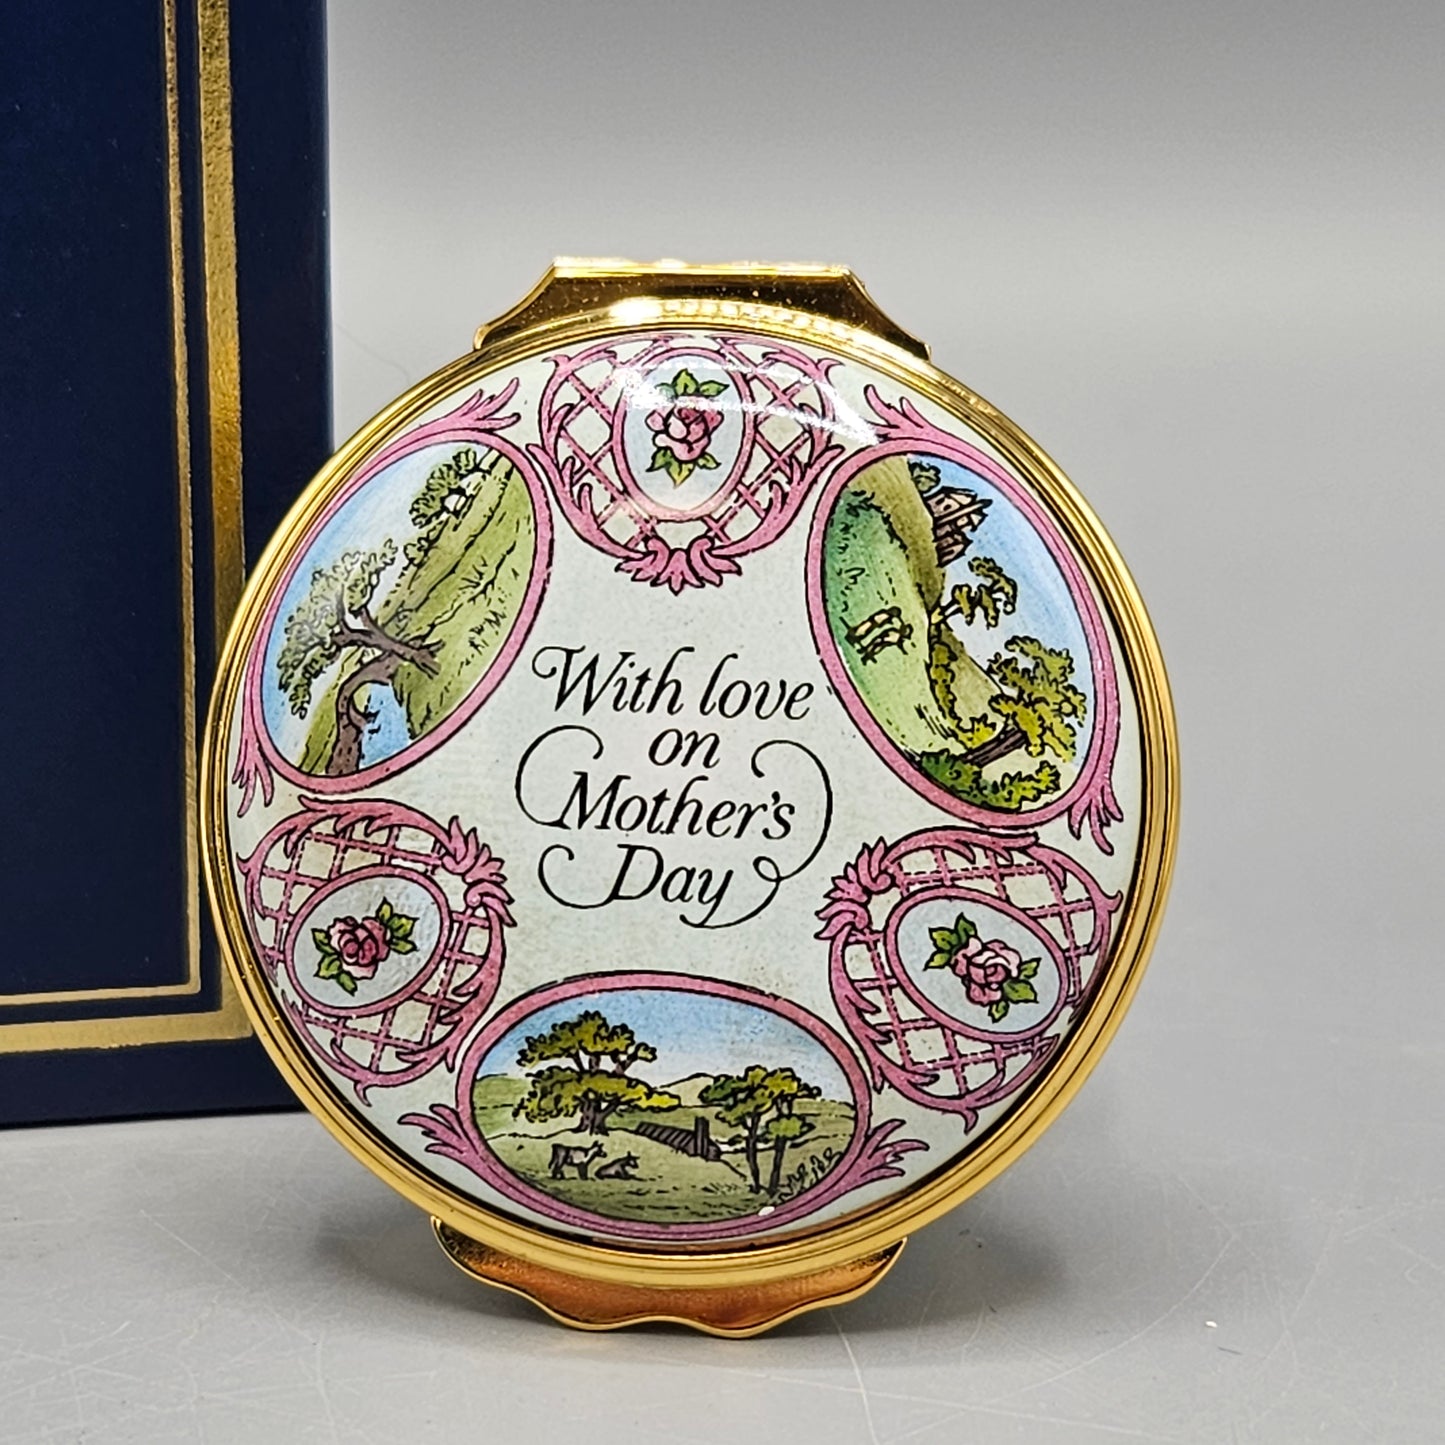 1994 Halcyon Days Enamel Mother's Day "With Love on Mother's Day"